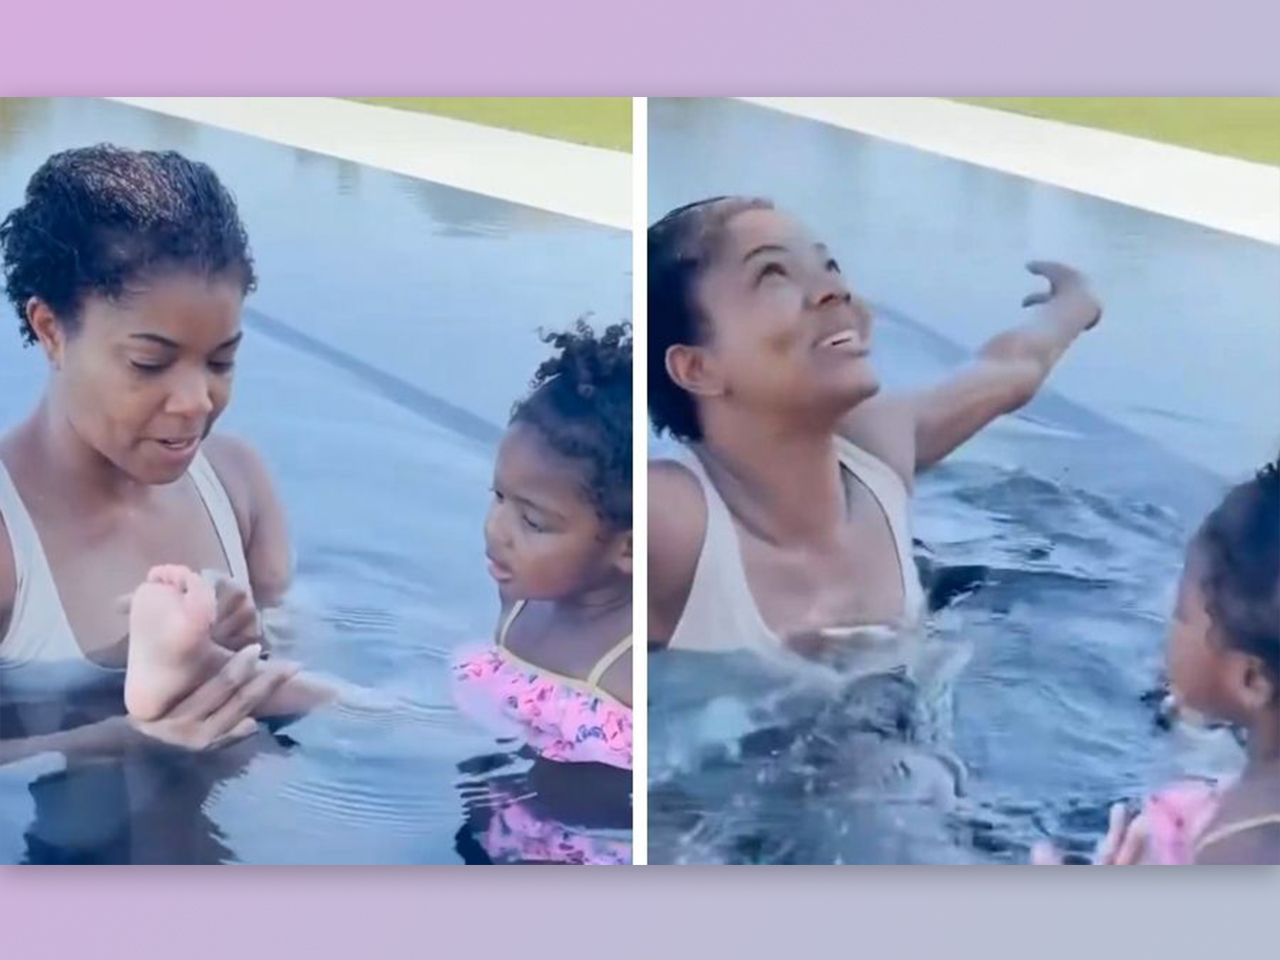 Gabrielle Union in a pool with her daughter